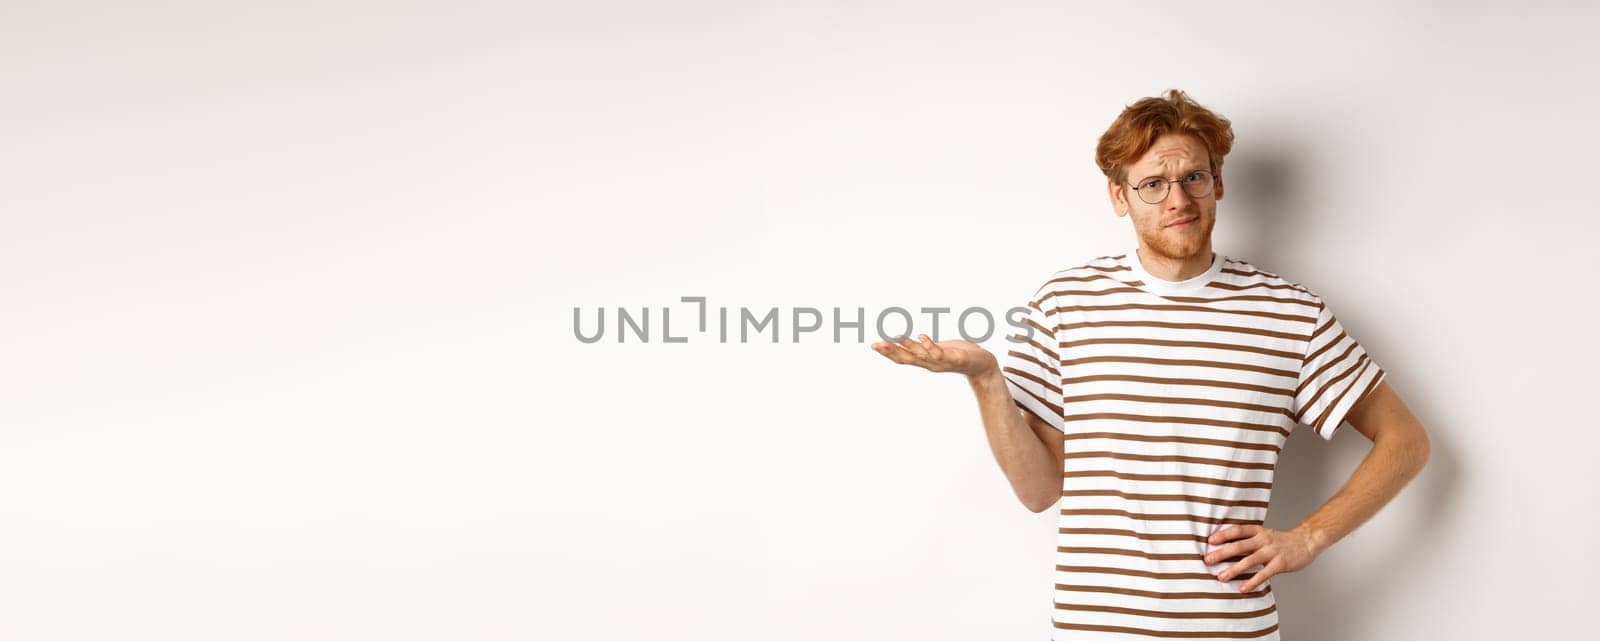 So what. Confused and annoyed redhead man waiting for reply, standing questioned with raised hand, holding something on palm, white background.